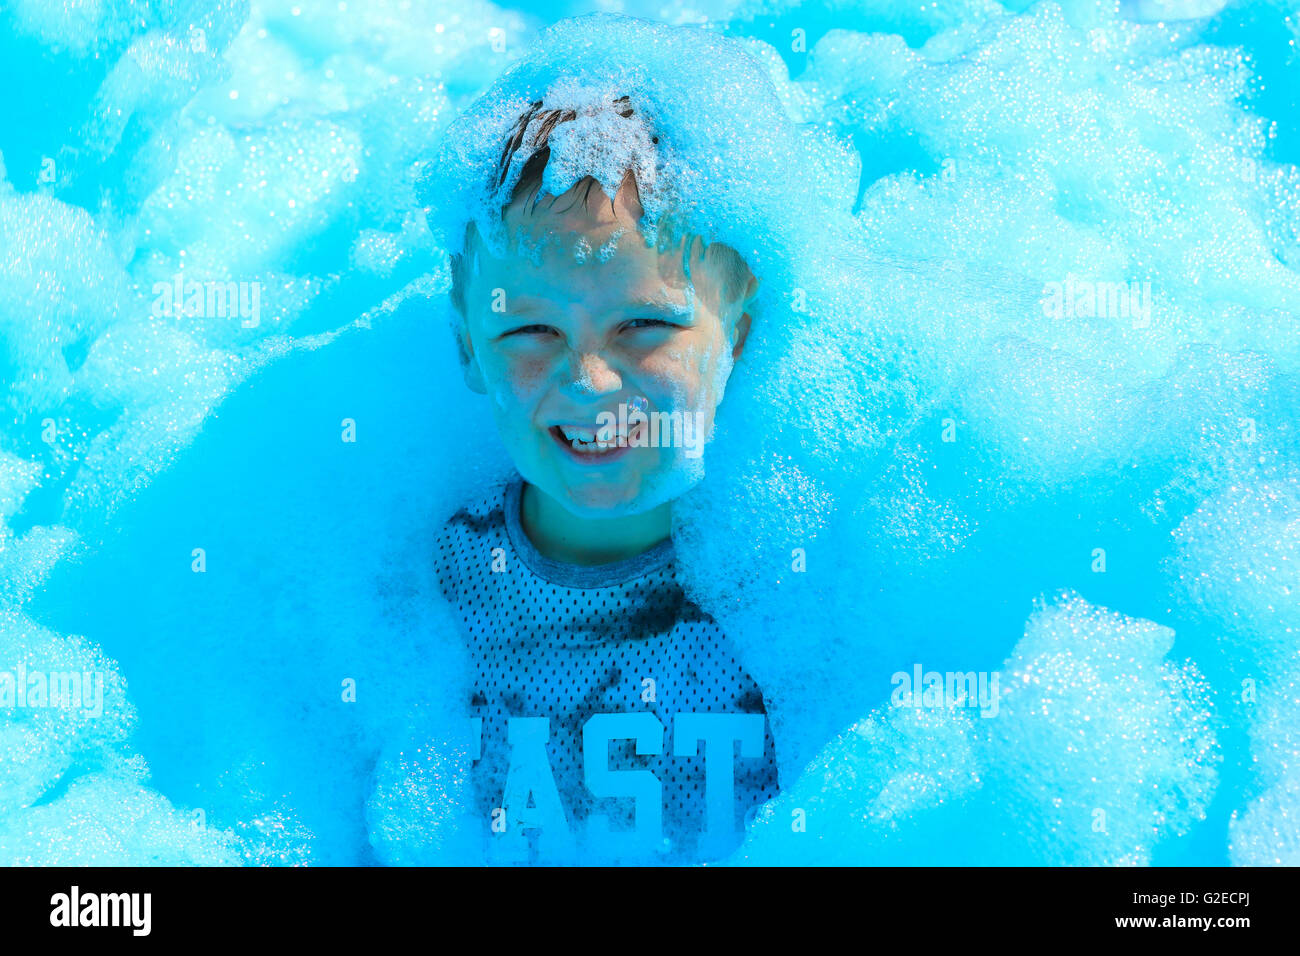 Glasgow, UK. 29th May, 2016. More than 700 people of all ages took part in a charity 'Bubble Rush' where the participants had to run through bubble stations while high powered foam cannons covered them in foam. The Fun Run was started by the TV celebrity CAROL SMILLIE who also took part in the race 'warm up' and the purpose of the event   was to raise funds for the new Prince and Princess of Wales Hospice Credit:  Findlay/Alamy Live News Stock Photo